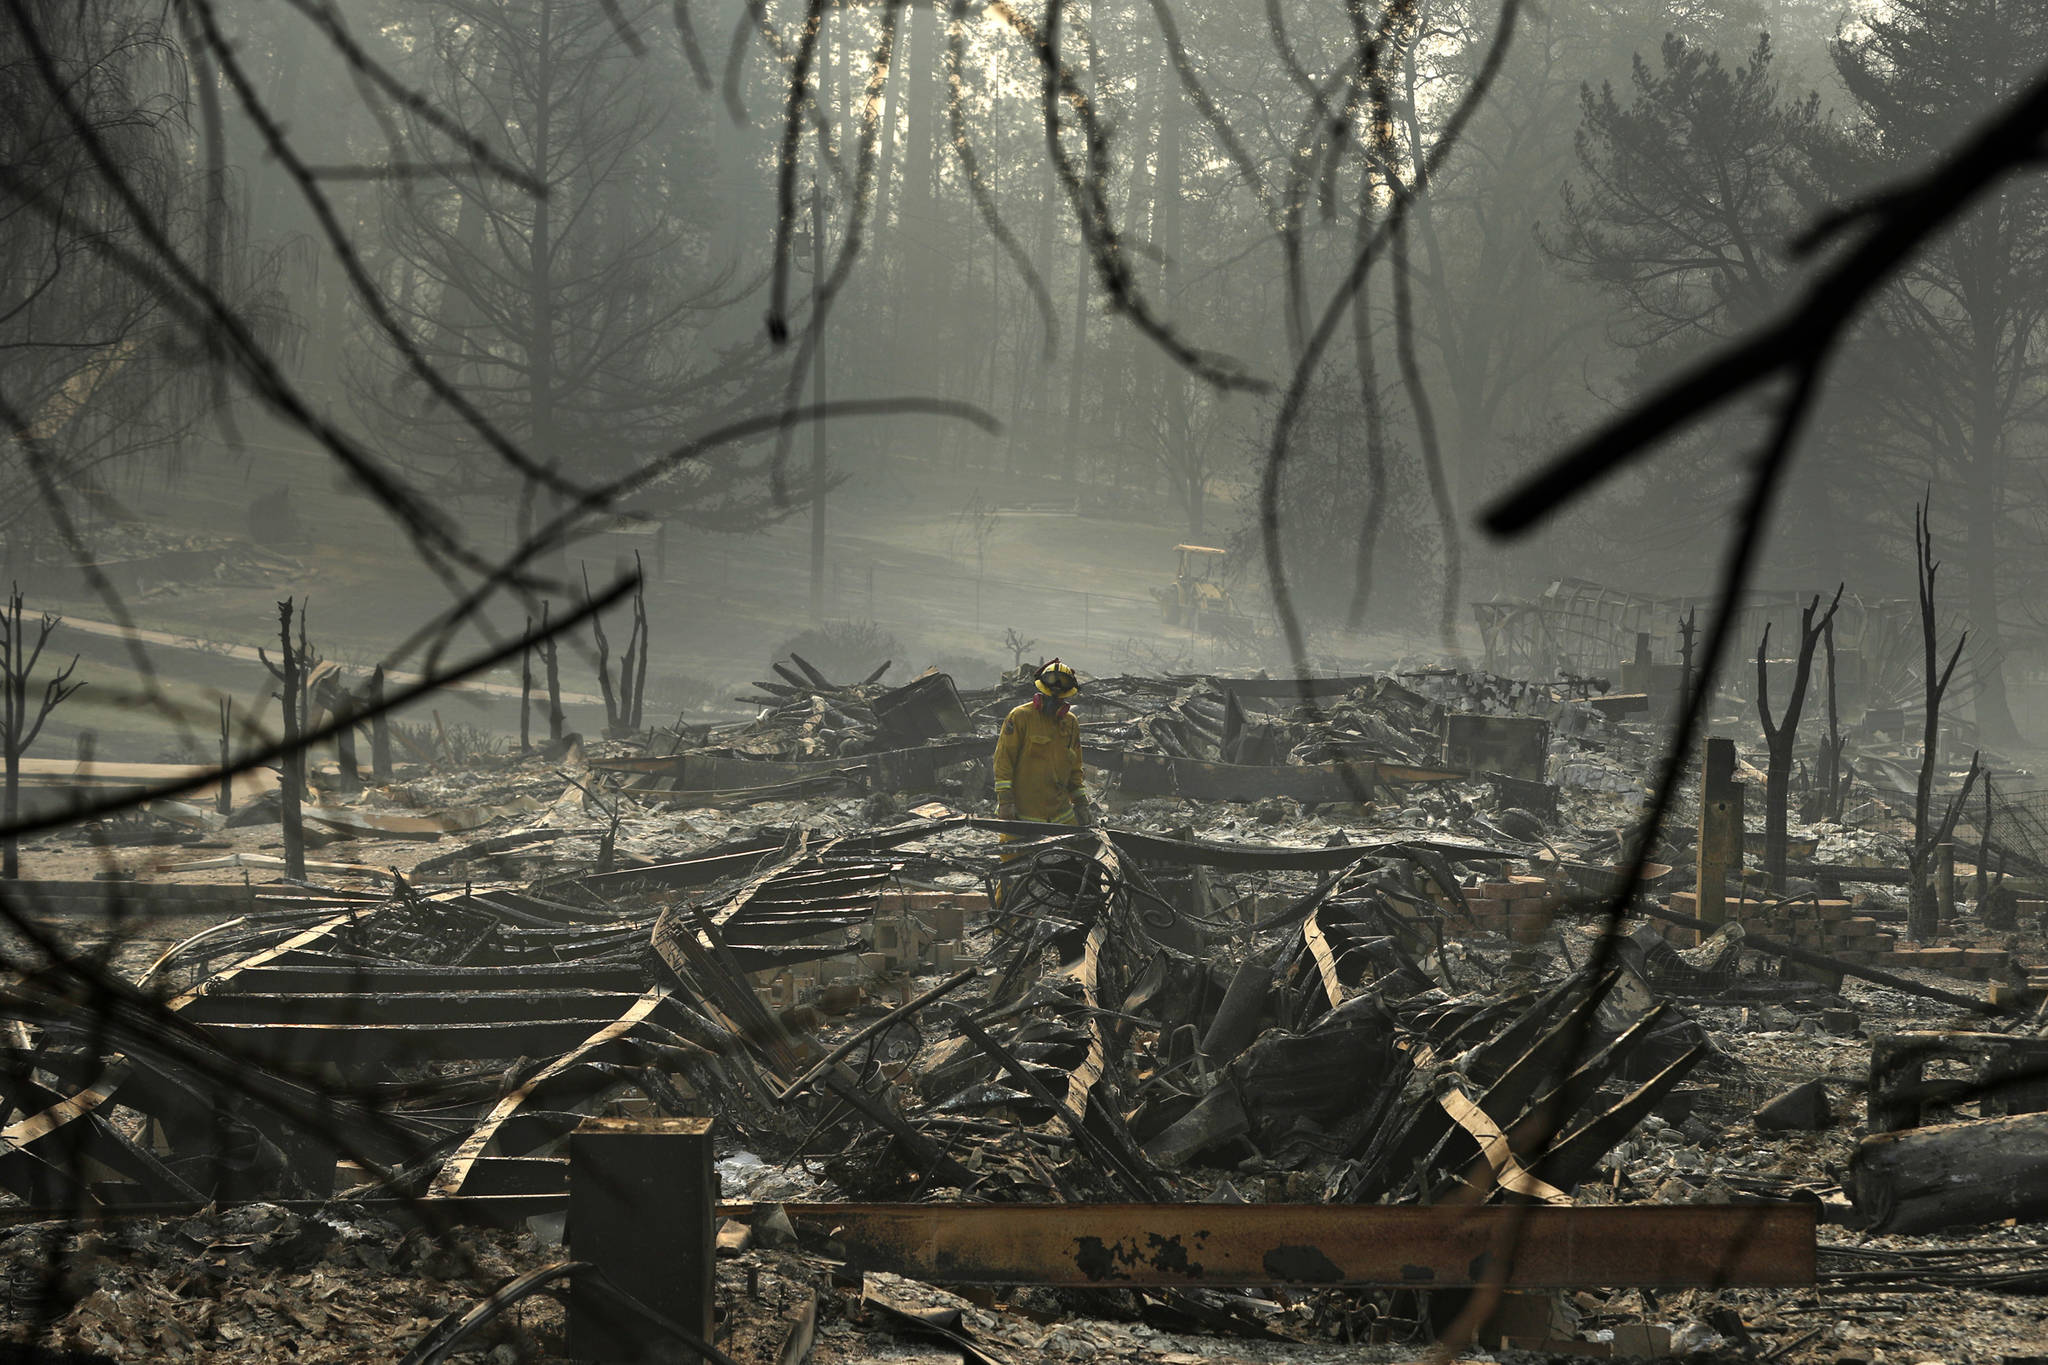 In this Nov. 16, 2018 photo, a firefighter searches for human remains in a trailer park destroyed in the Camp Fire, in Paradise, California. The massive wildfire that killed dozens of people and destroyed thousands of homes has been fully contained after burning for more than two weeks, authorities said Sunday, Nov. 25. (John Locher | Associated Press File)